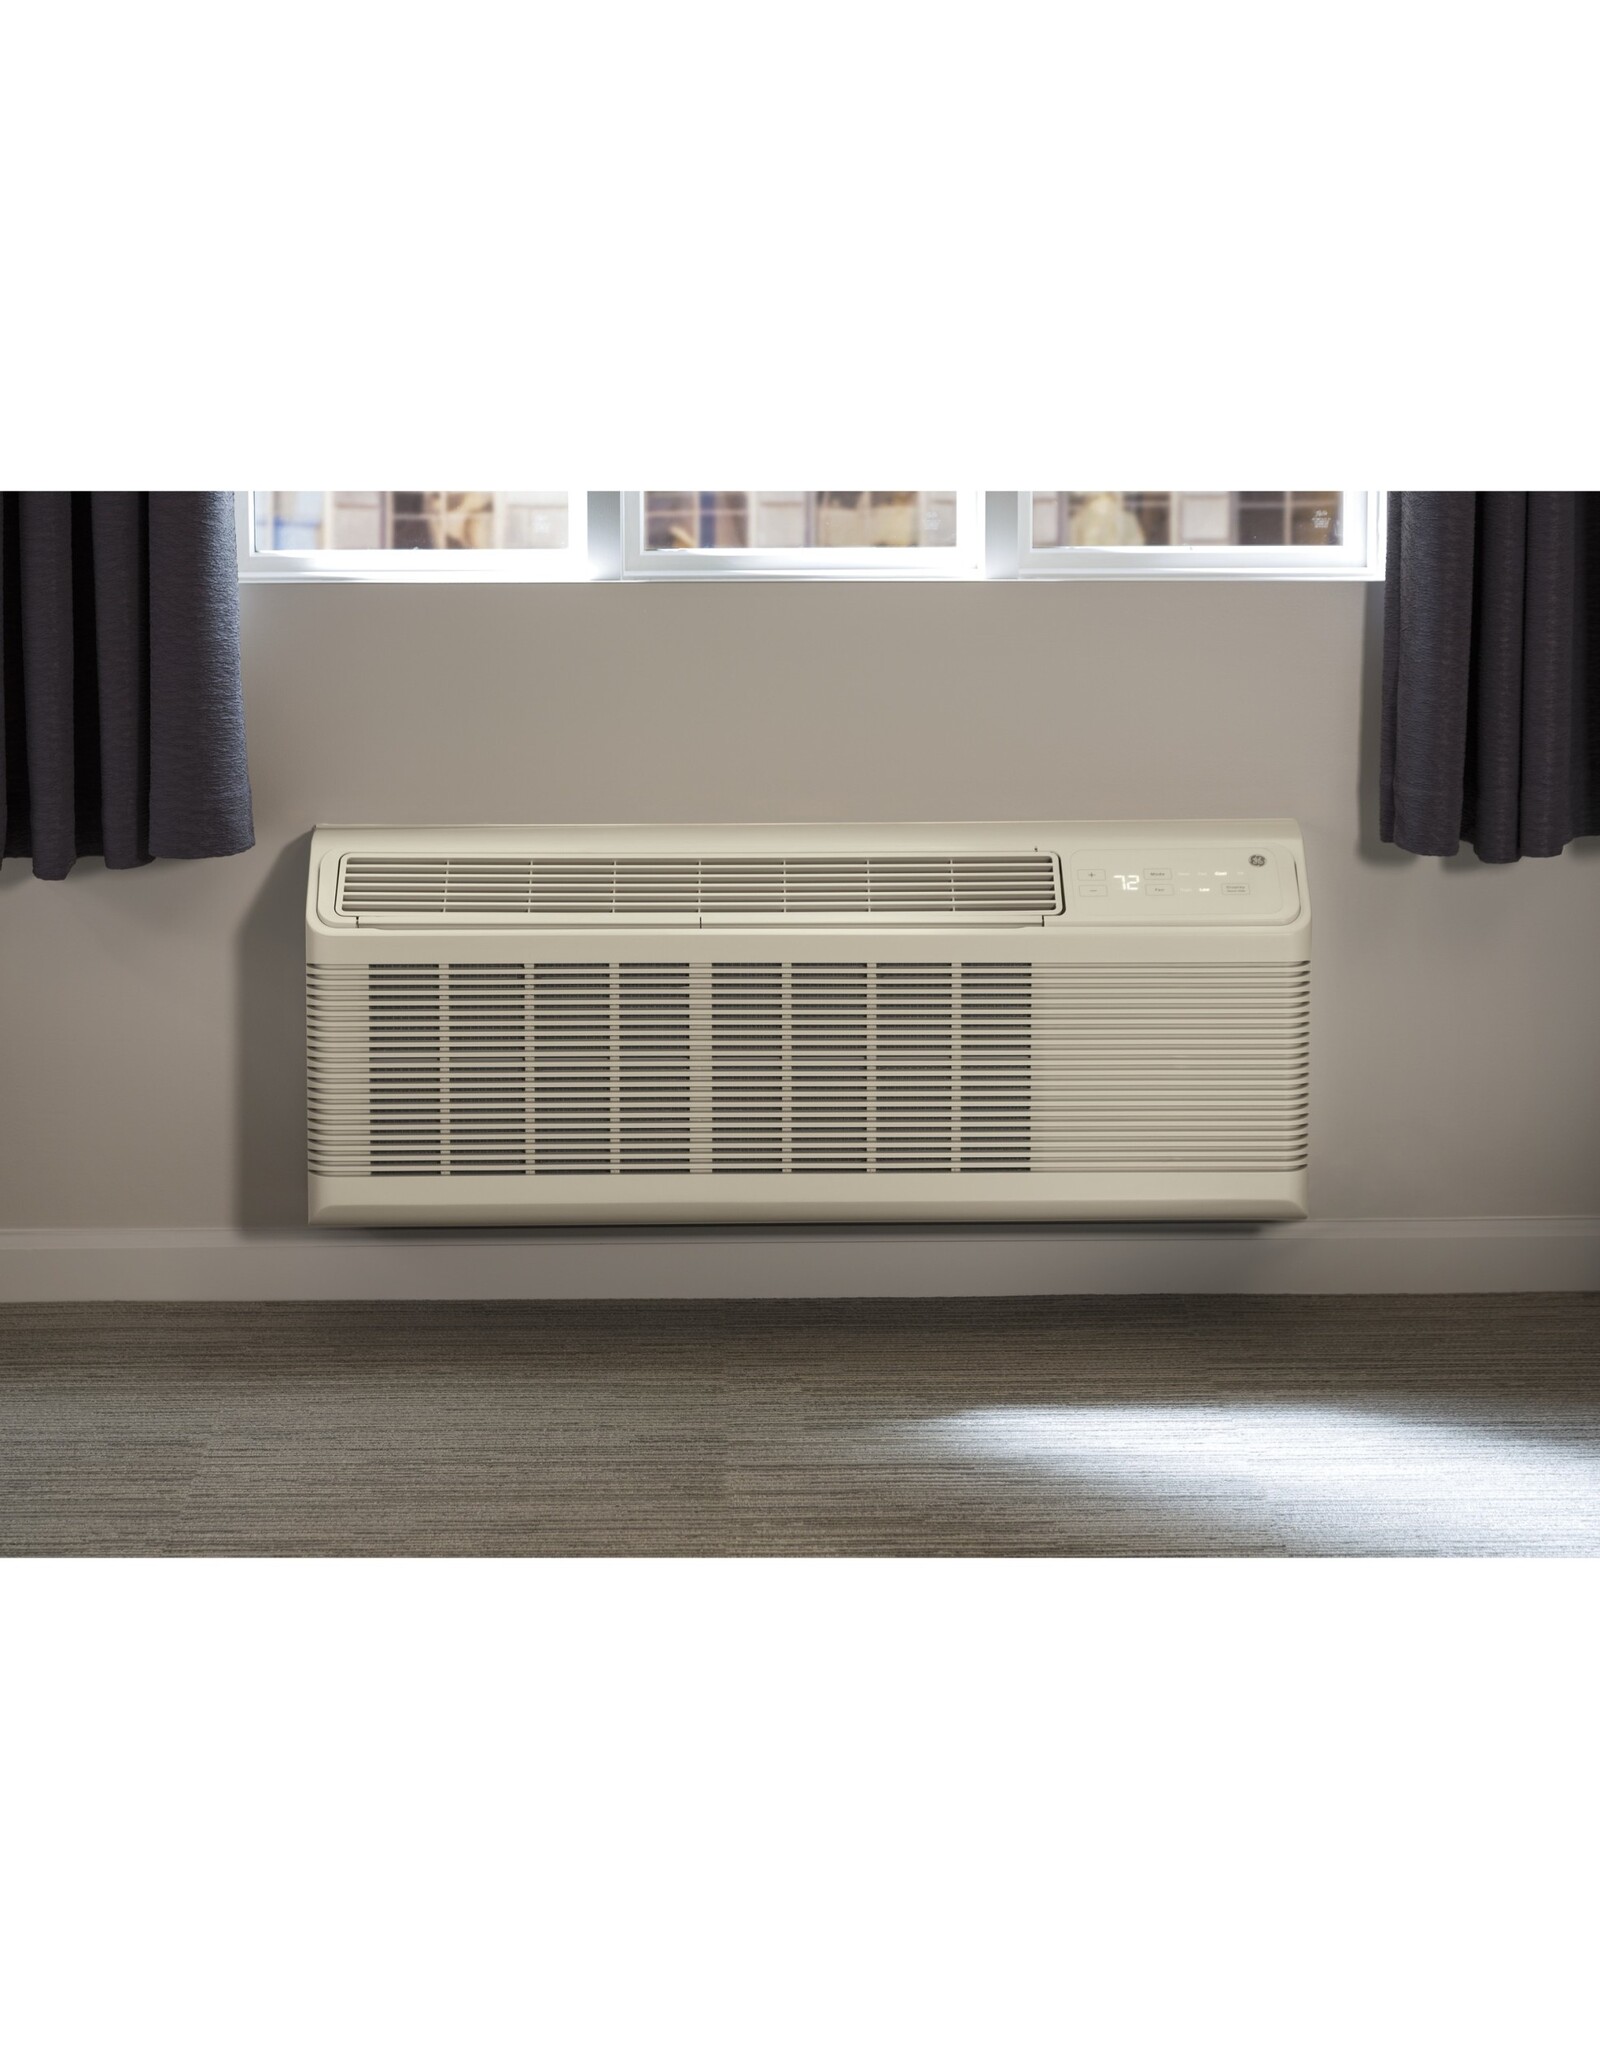 AZ45E15EAC GE Zoneline® Cooling and Electric Heat Unit with Corrosion Protection, 265 Volt